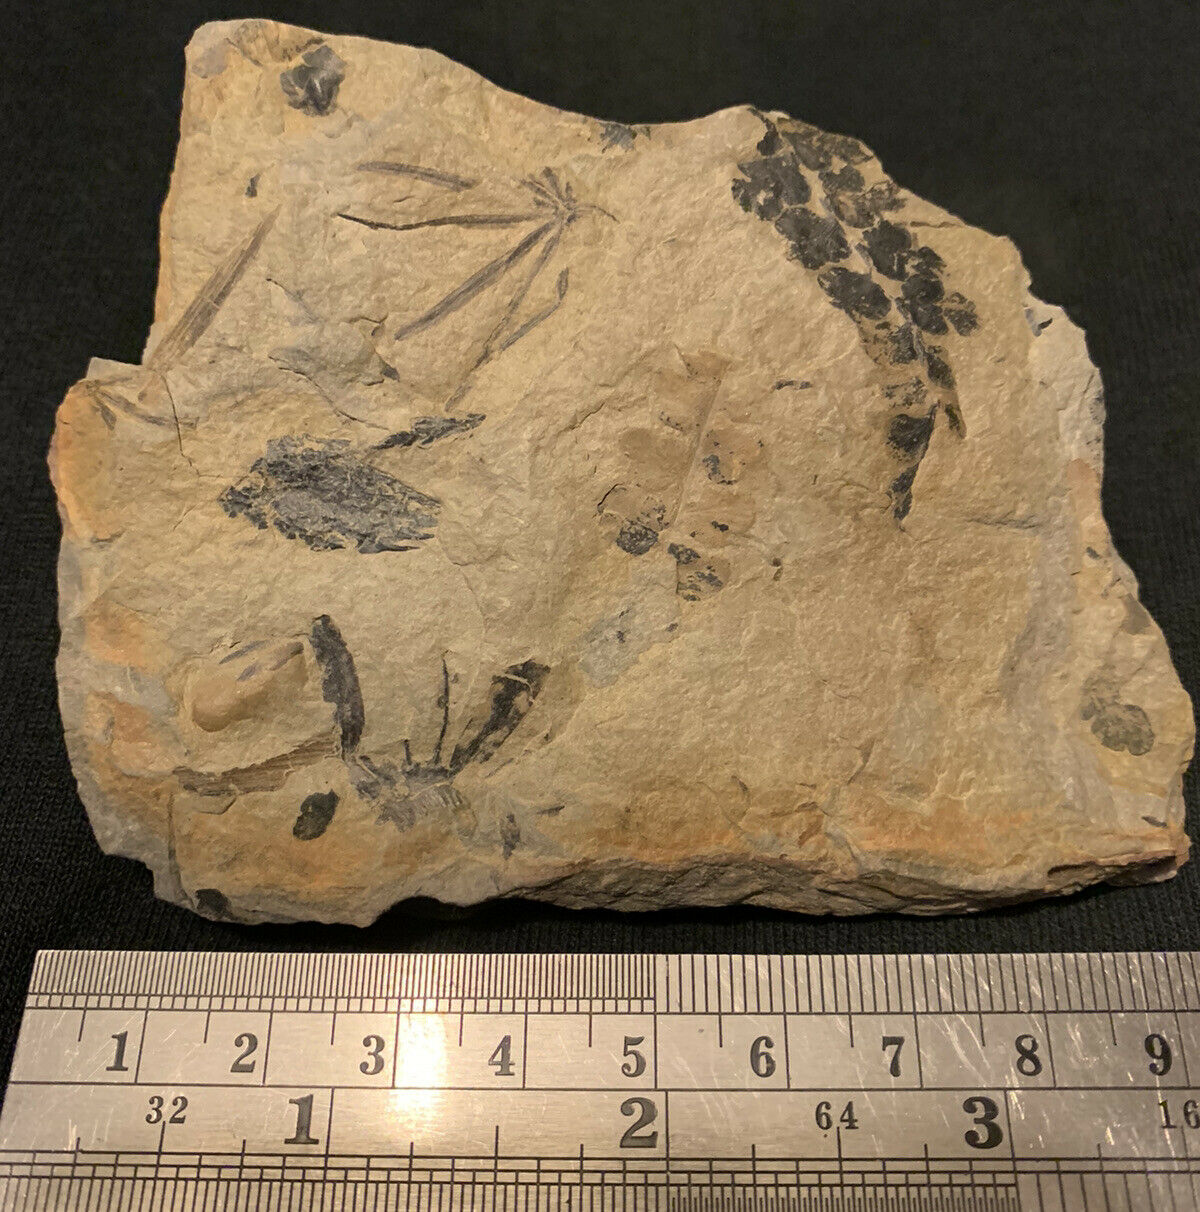 Annularia & Fern Fossils From The Carboniferous Pennsylvanian Period